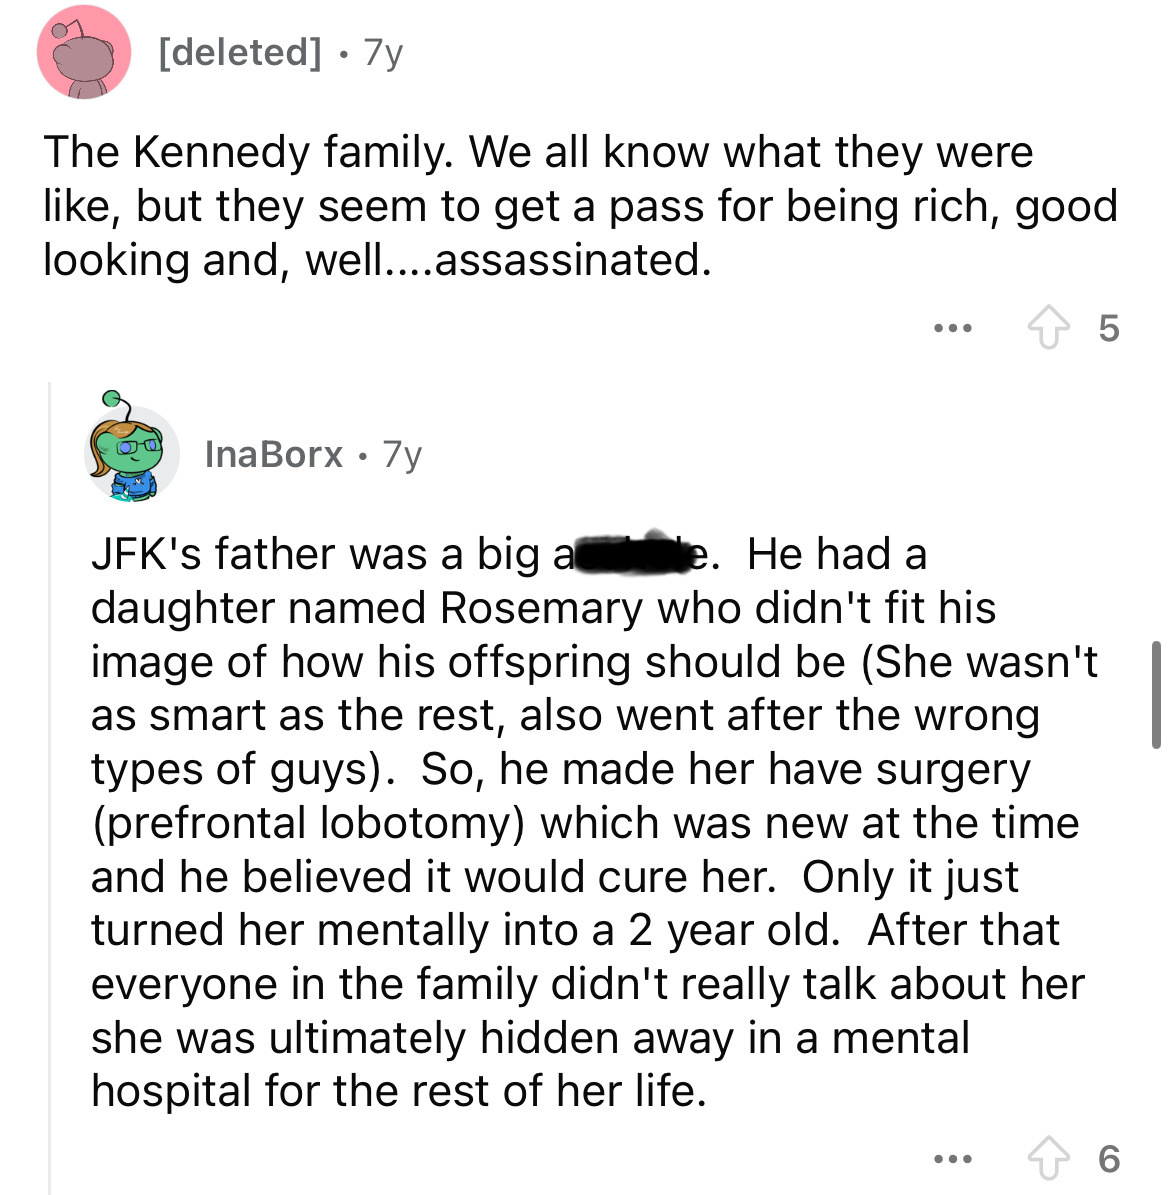 screenshot - deleted 7y The Kennedy family. We all know what they were , but they seem to get a pass for being rich, good looking and, well....assassinated. InaBorx 7y Jfk's father was a big a e. He had a daughter named Rosemary who didn't fit his image o